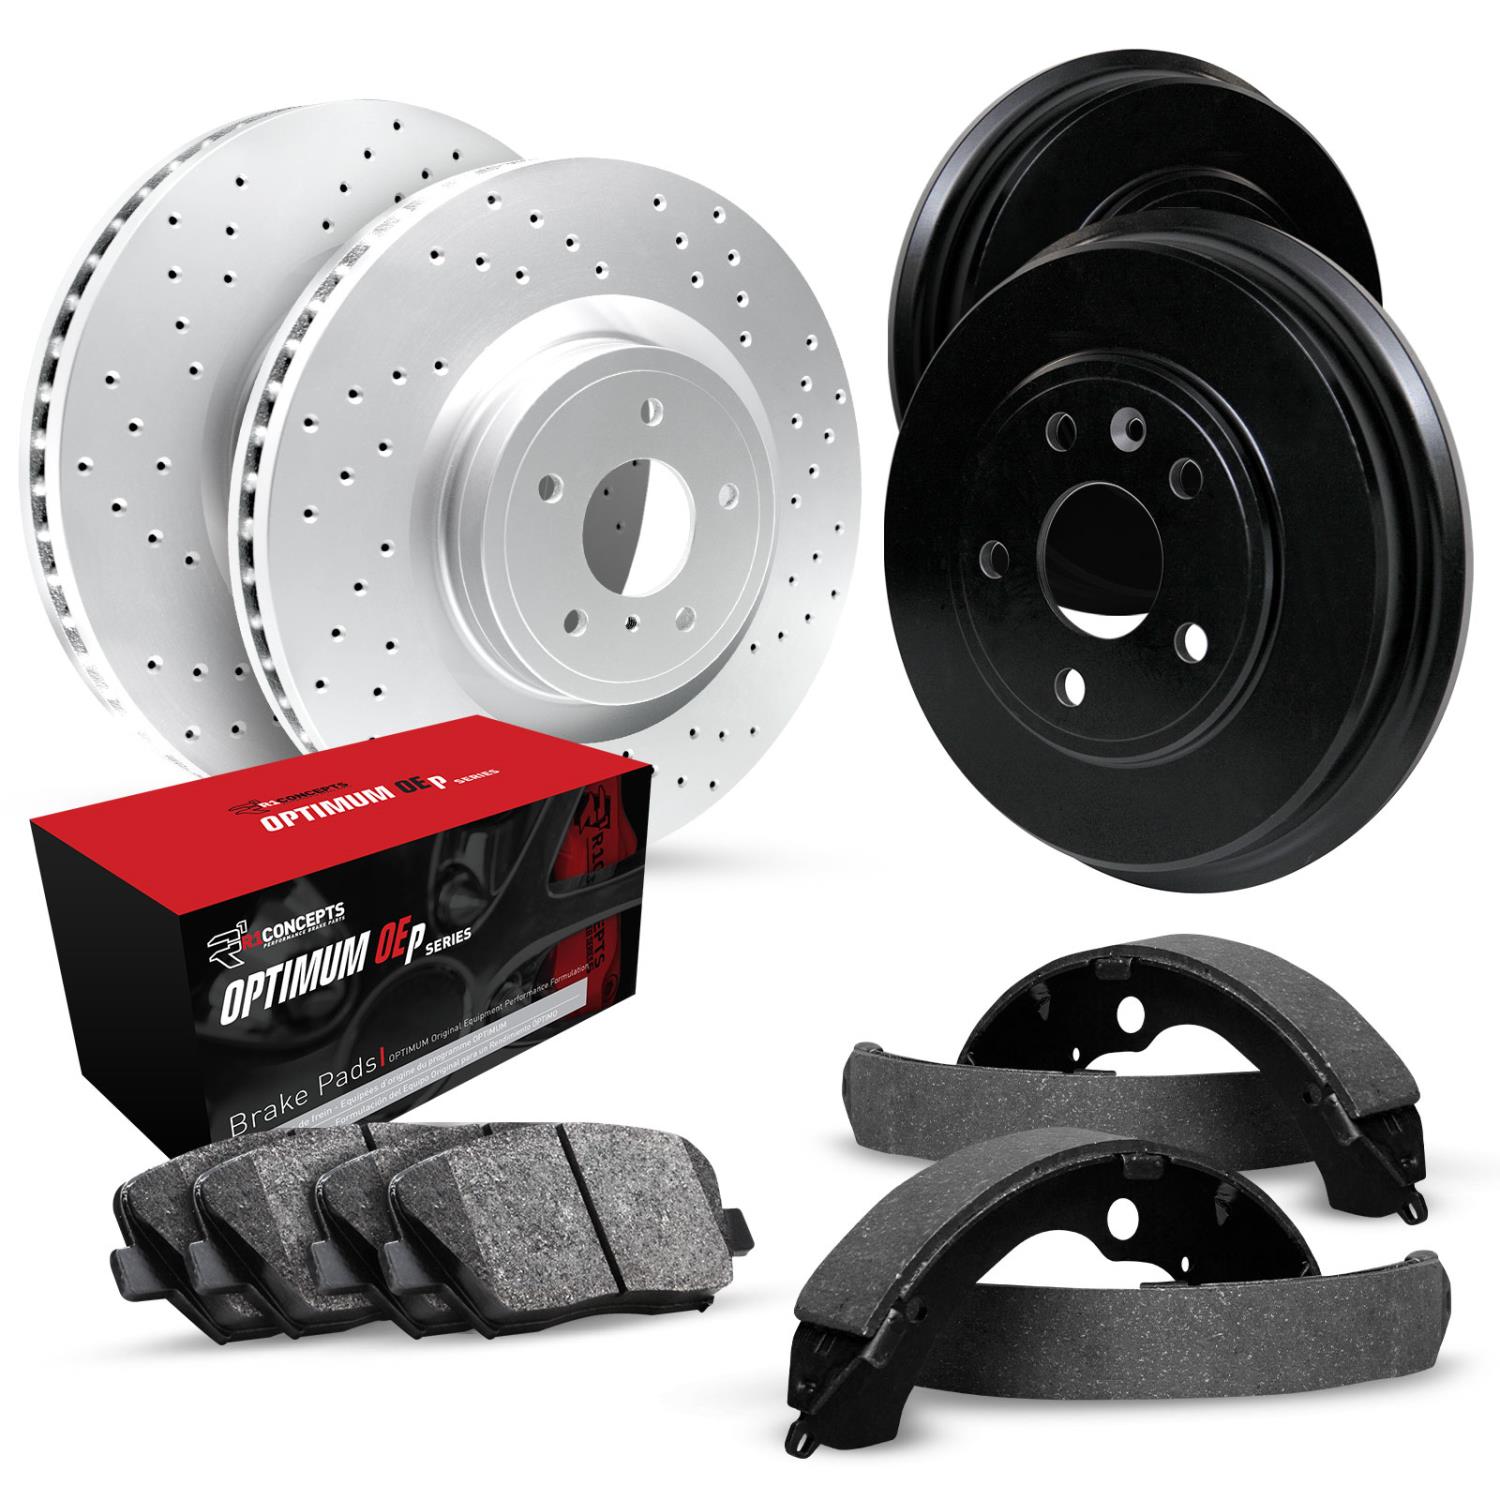 GEO-Carbon Drilled Brake Rotor & Drum Set w/Optimum OE Pads & Shoes, 1990-1995 GM, Position: Front & Rear